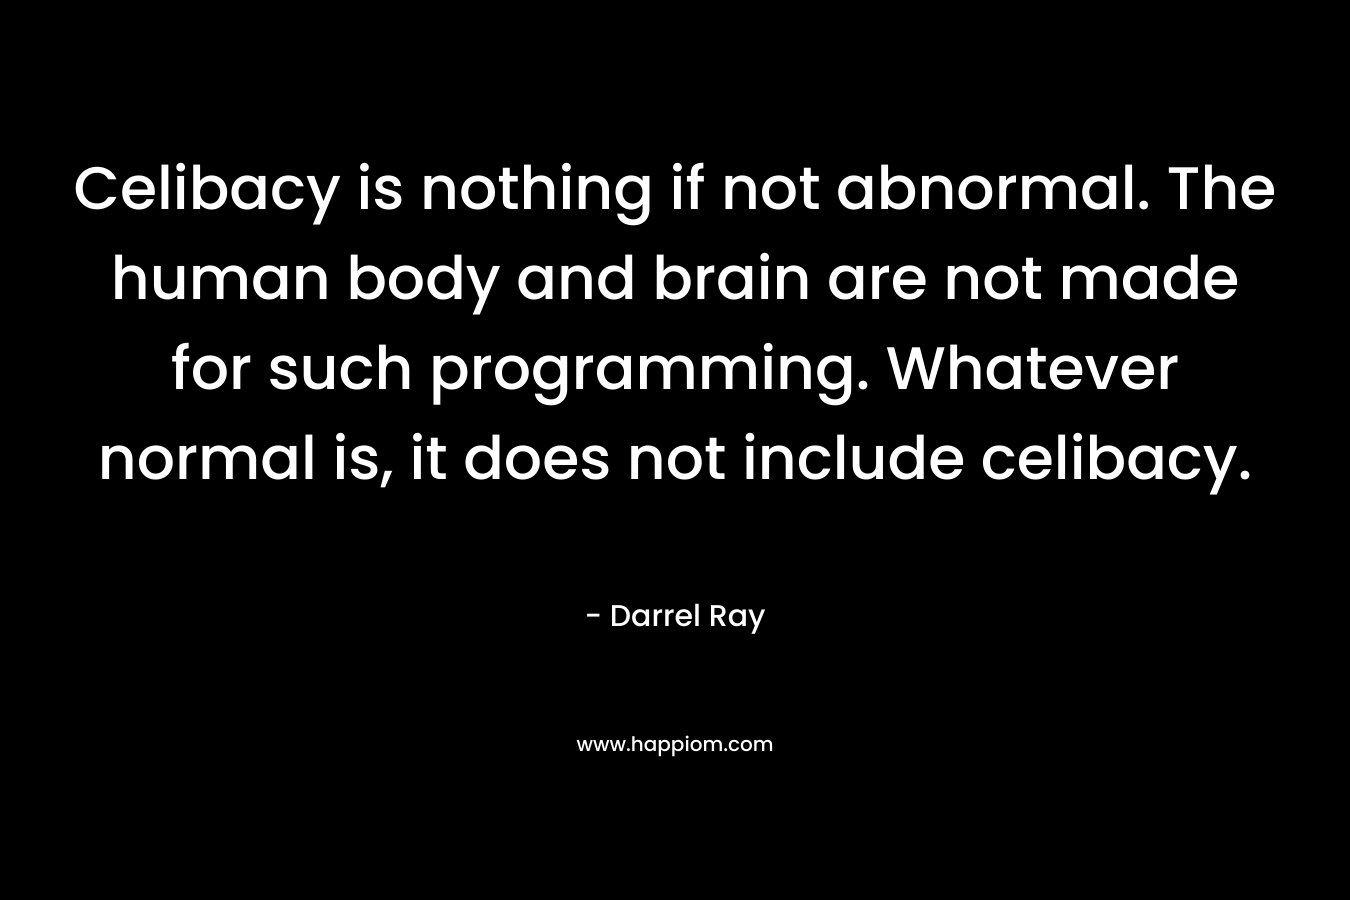 Celibacy is nothing if not abnormal. The human body and brain are not made for such programming. Whatever normal is, it does not include celibacy.